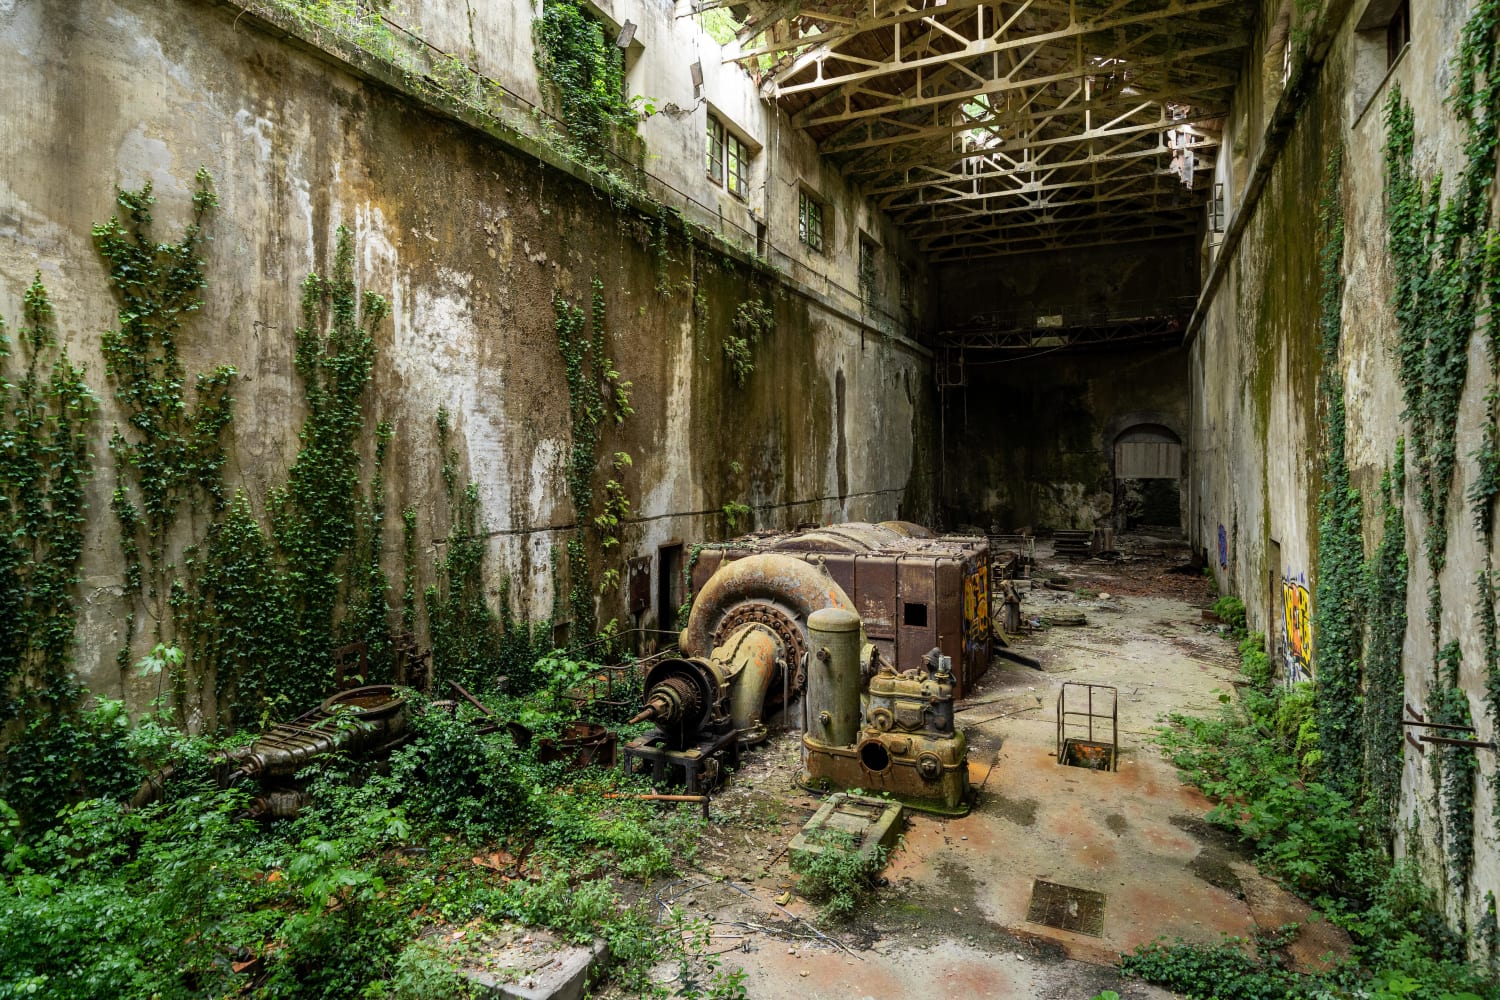 Power plant in Italy forgotten for 50+ years